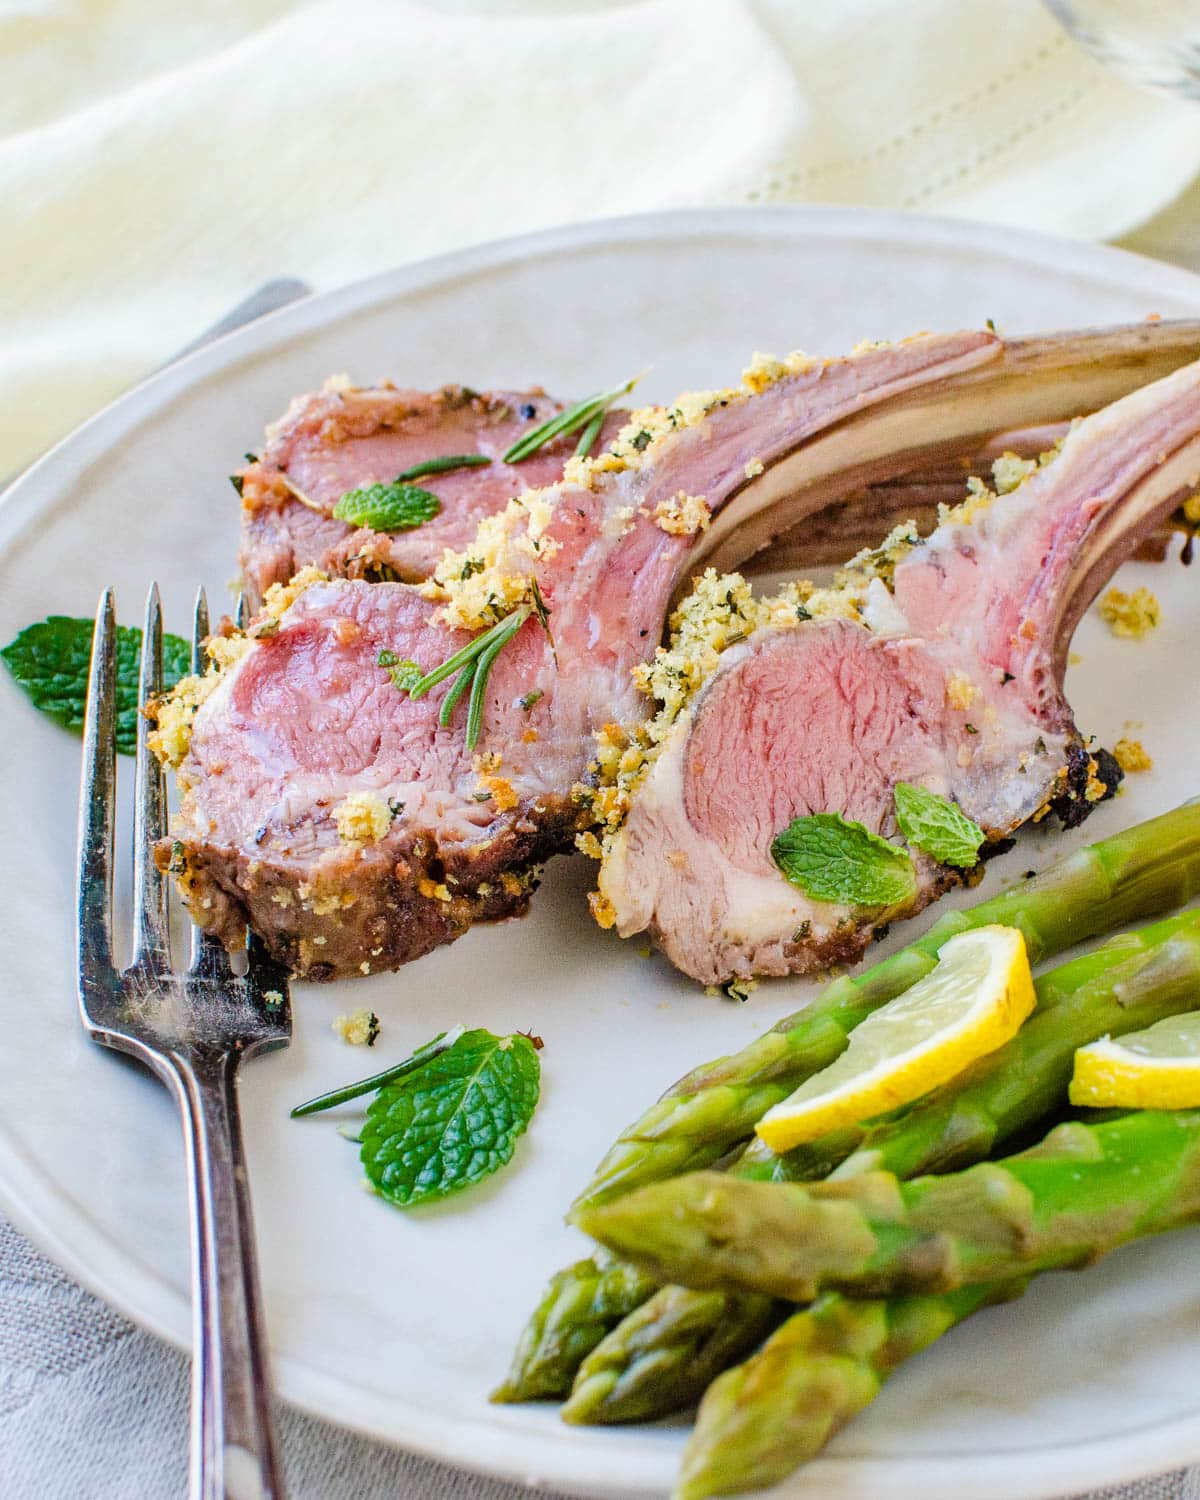 Serving the rack of lamb with asparagus.